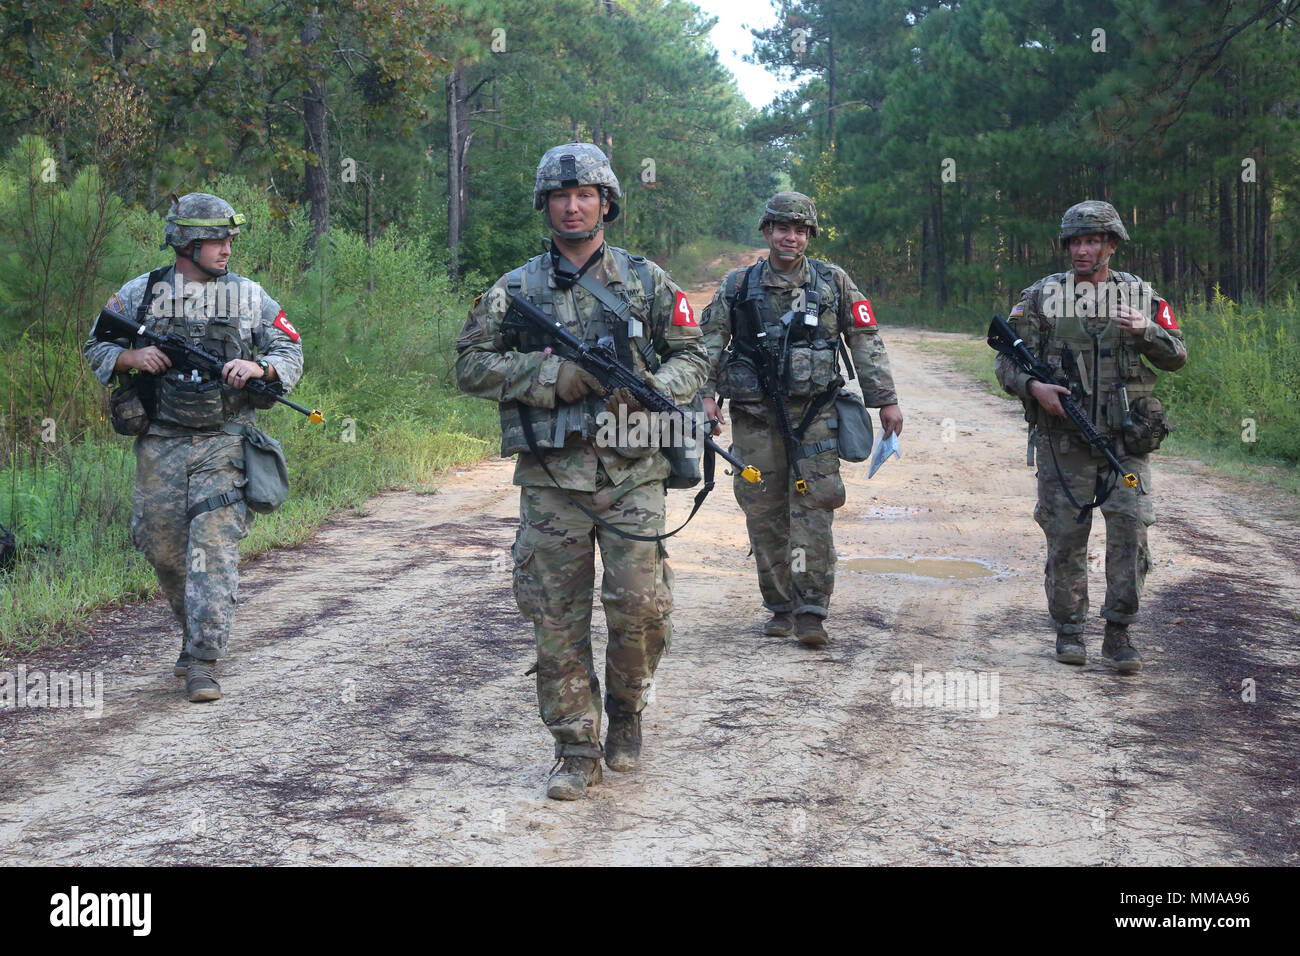 U.S. Soldiers, competing in the 2017 Best Medic Competition, walk together to the finish line after completing the Army Warrior Training at Fort Bragg, N.C., Sept. 19, 2017. The competition tested the physical and mental toughness, as well as the technical competence, of each medic to identify the team moving forward to represent the region at the next level of the competition.  (U.S. Army photo by Pfc. Meleesa Gutierrez) Stock Photo